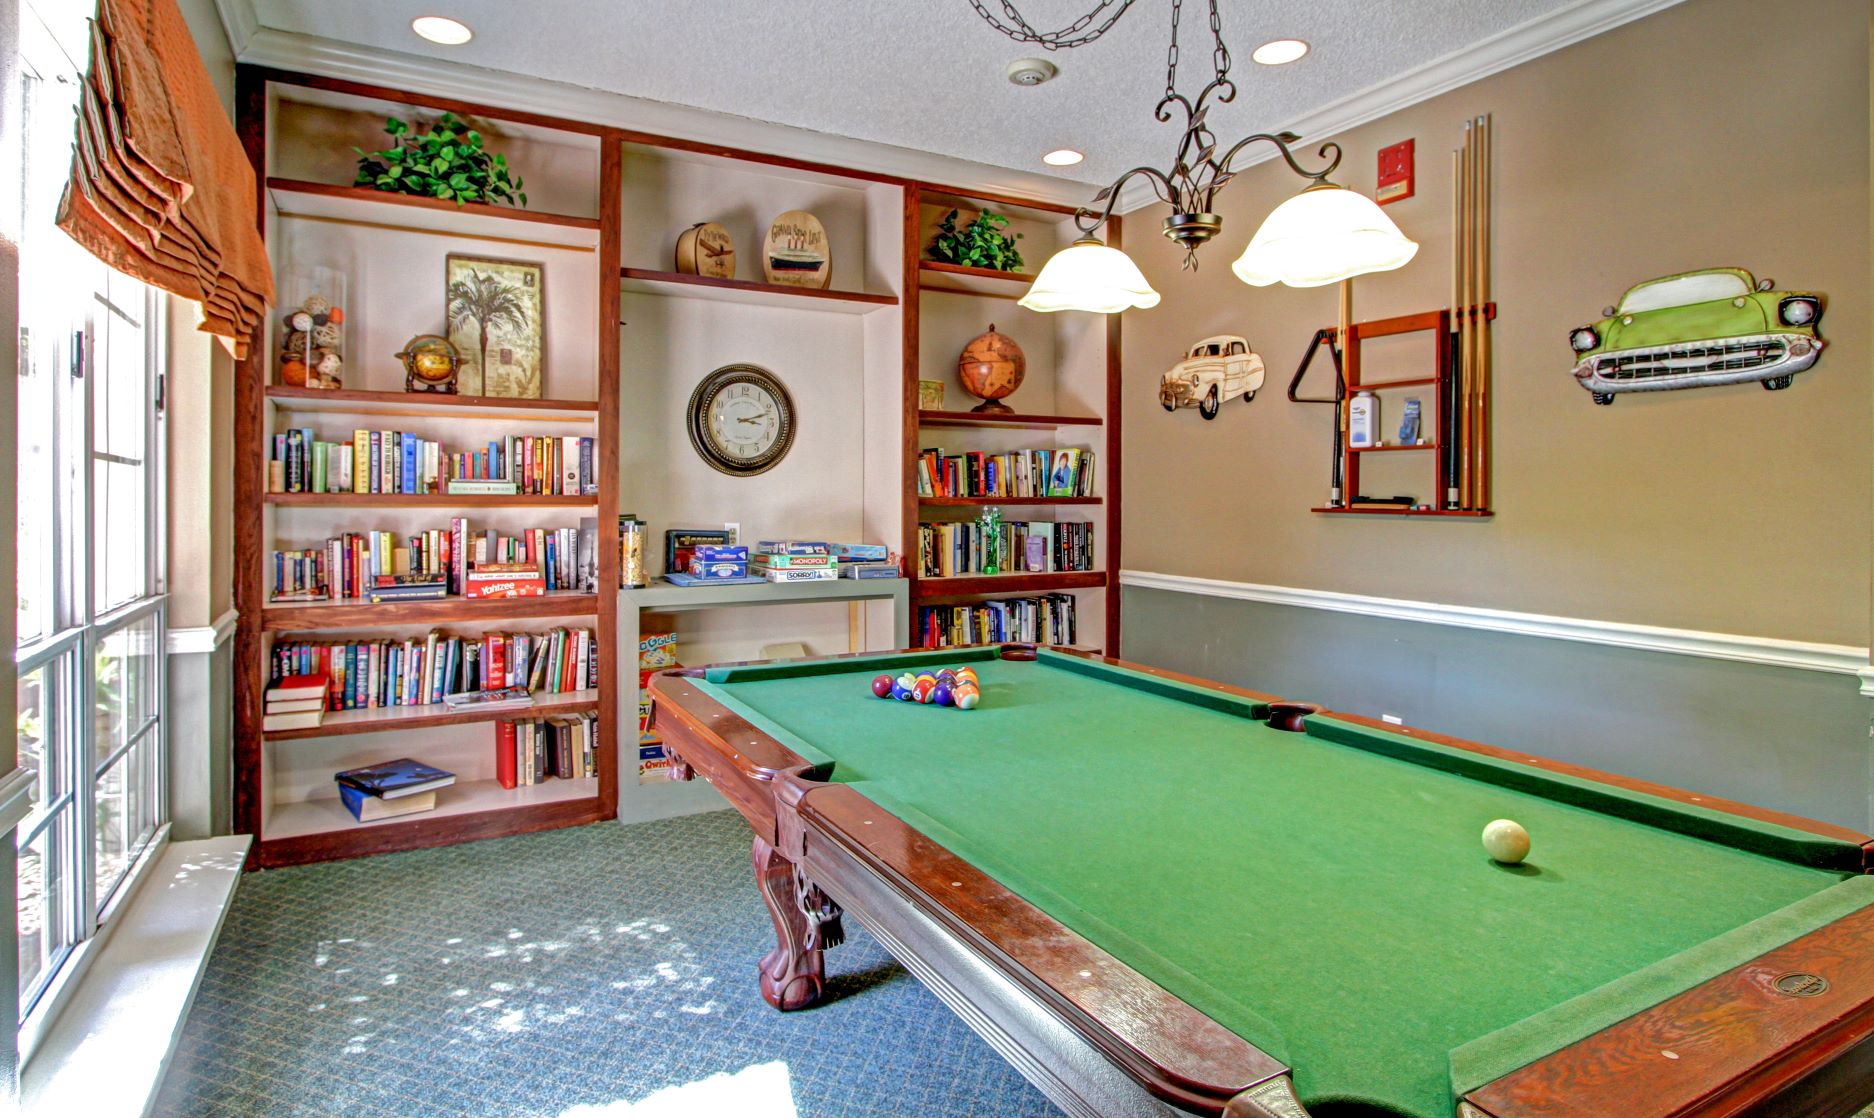 The Gardens of Port St. Lucie offers an onsite game room and library.